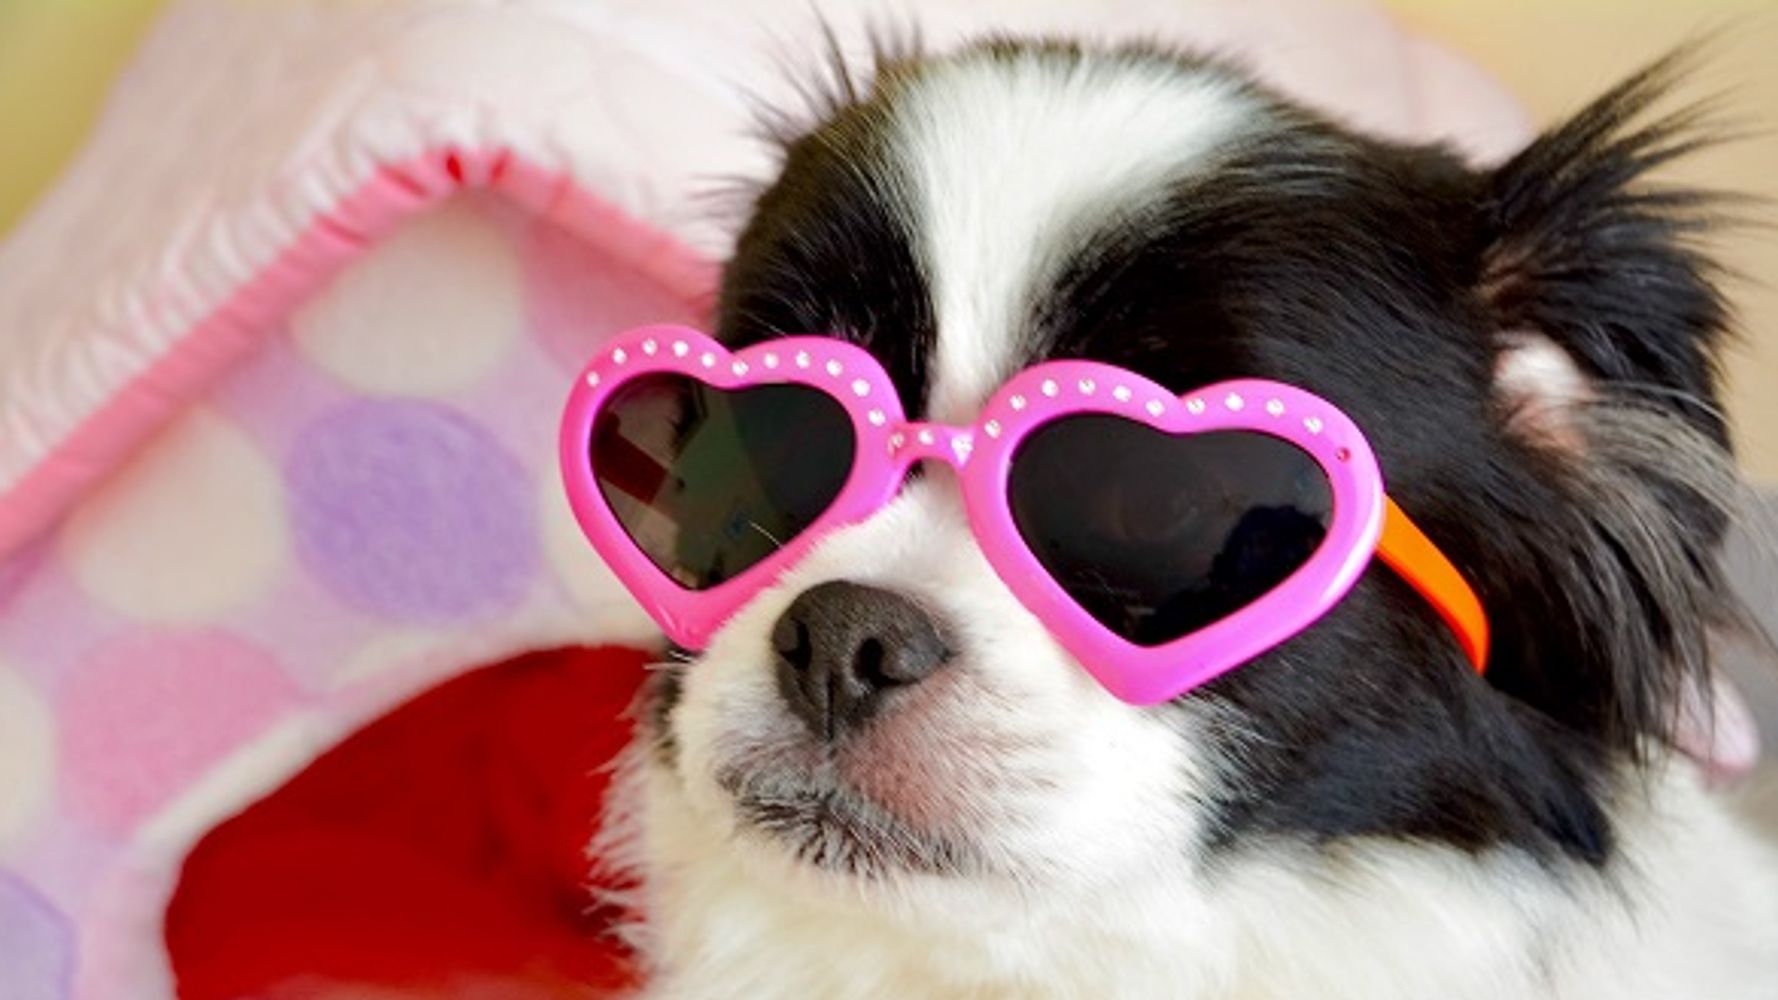 Superstar Black & White Dog Sits With Pink Sunglasses Over Eyes & Happy Smile